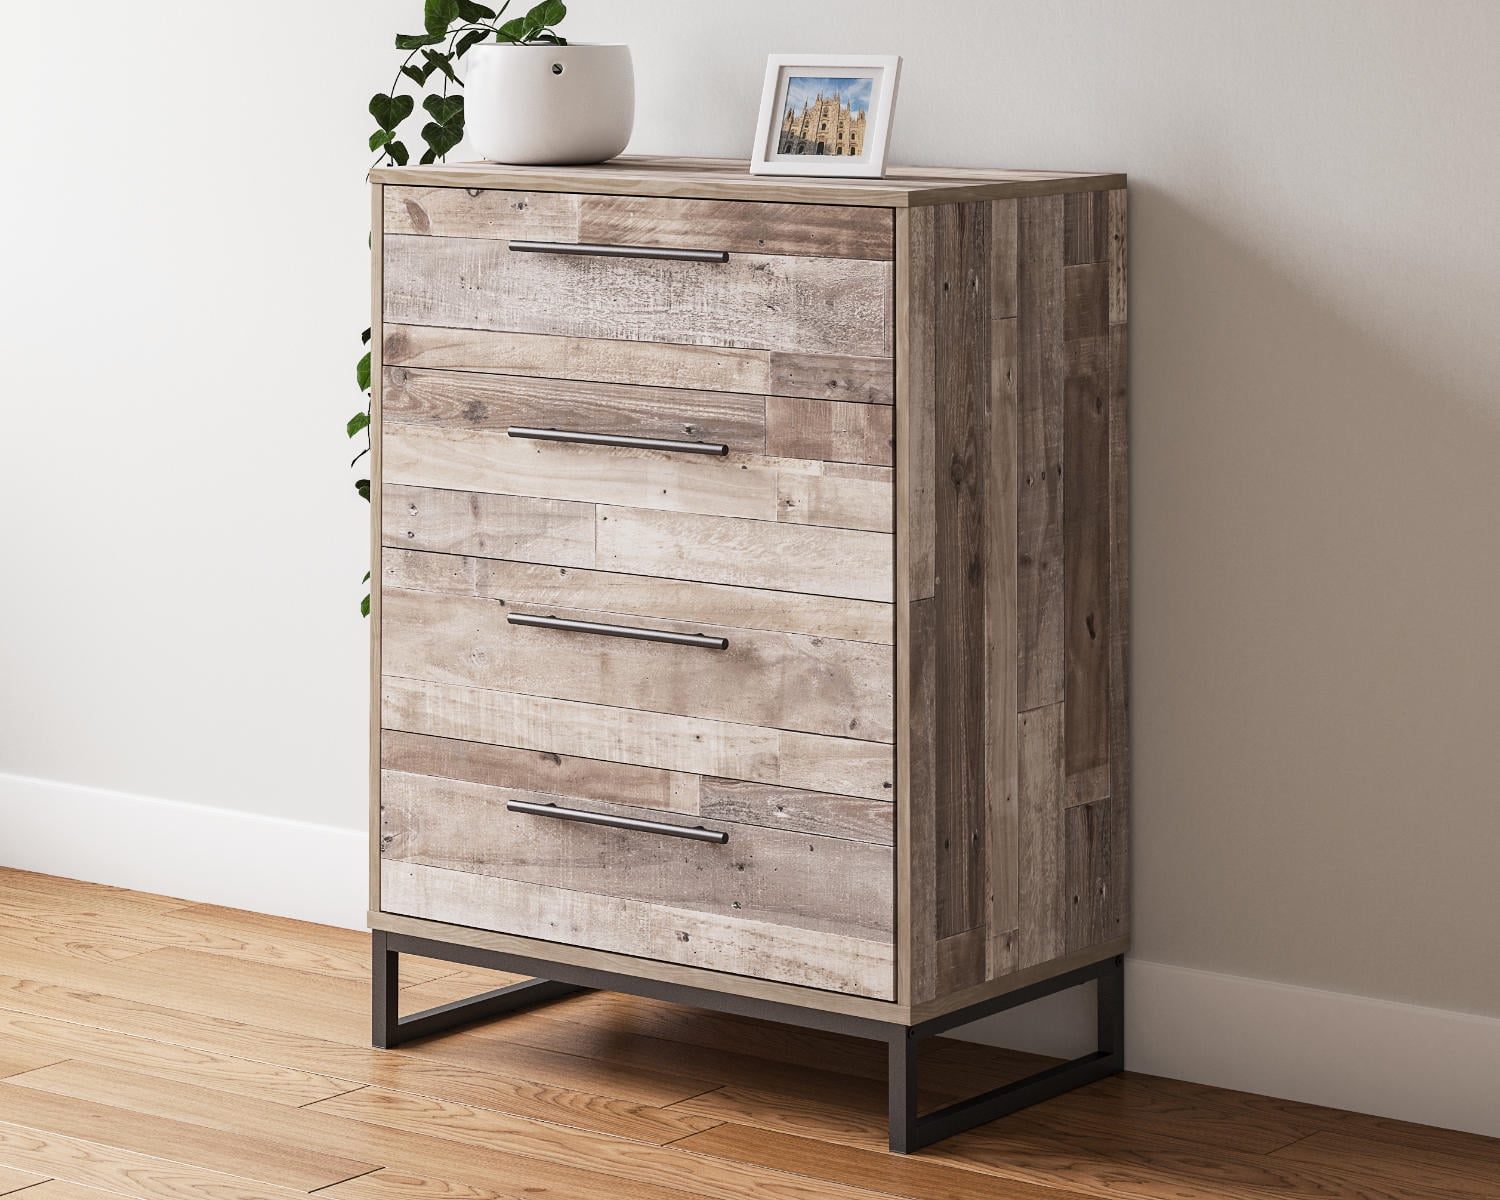 Signature Design by Ashley Neilsville Industrial 4 Drawer Chest of Drawers, Whitewash - image 1 of 8